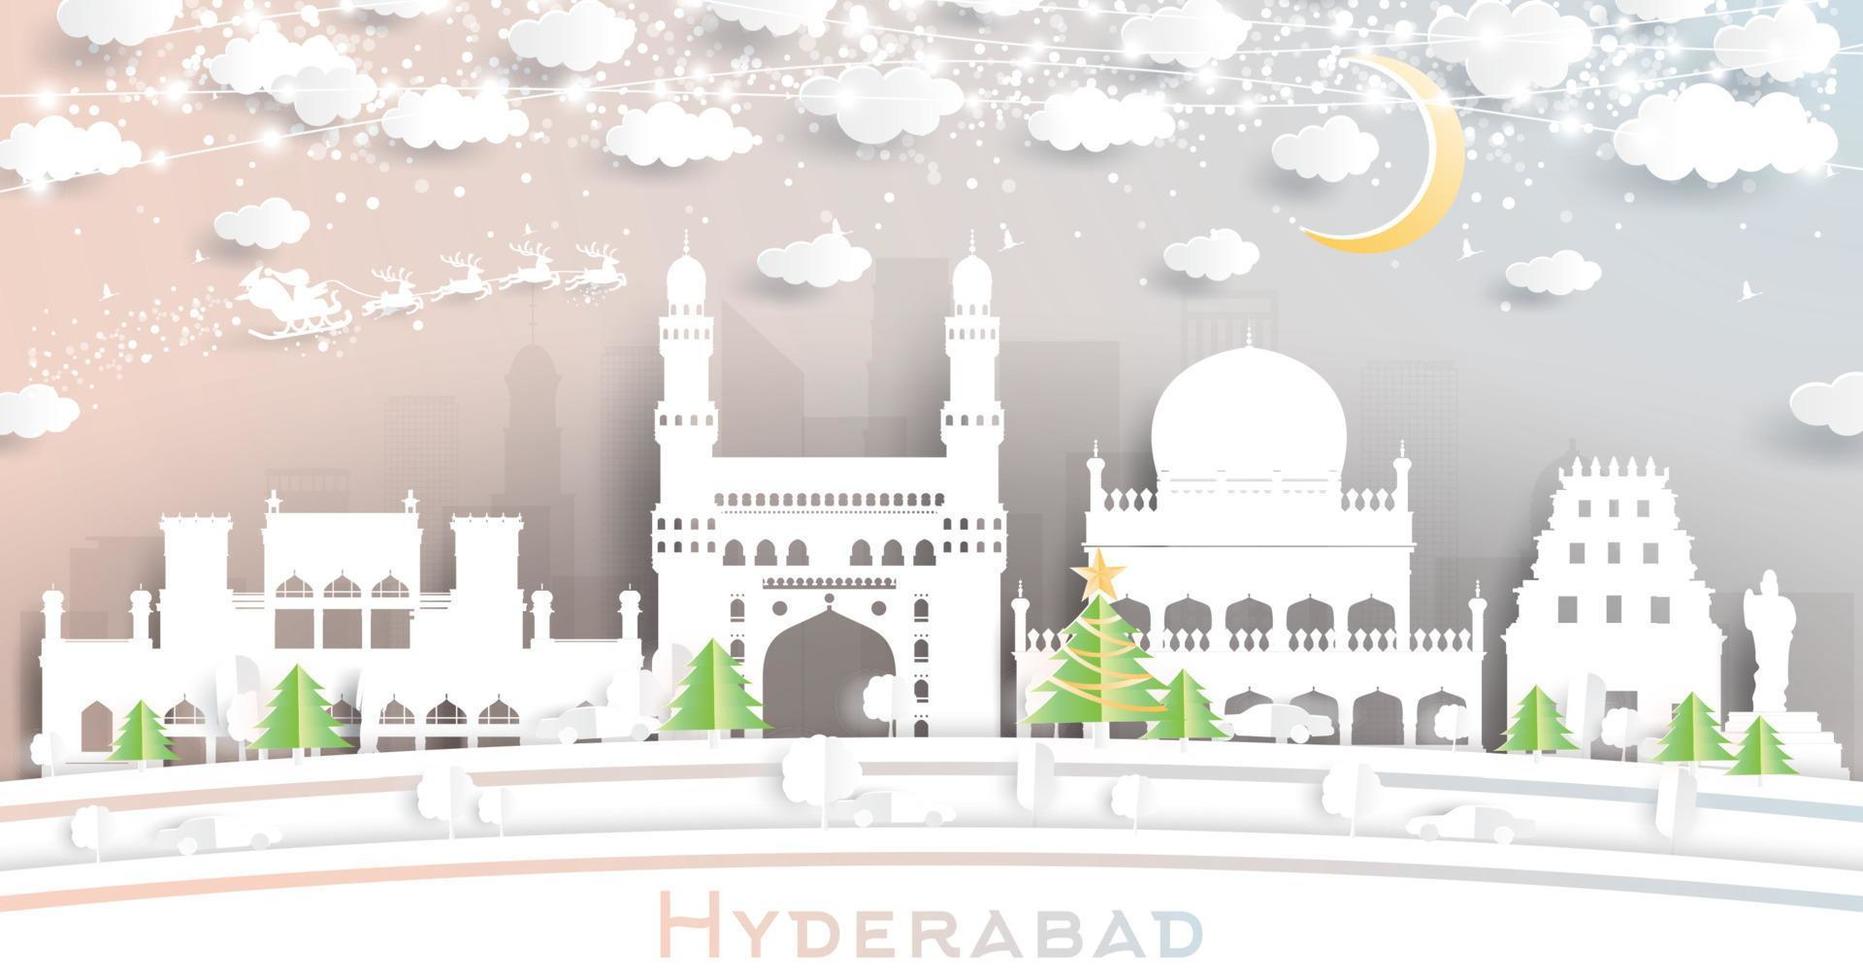 Hyderabad India City Skyline in Paper Cut Style with Snowflakes, Moon and Neon Garland. vector